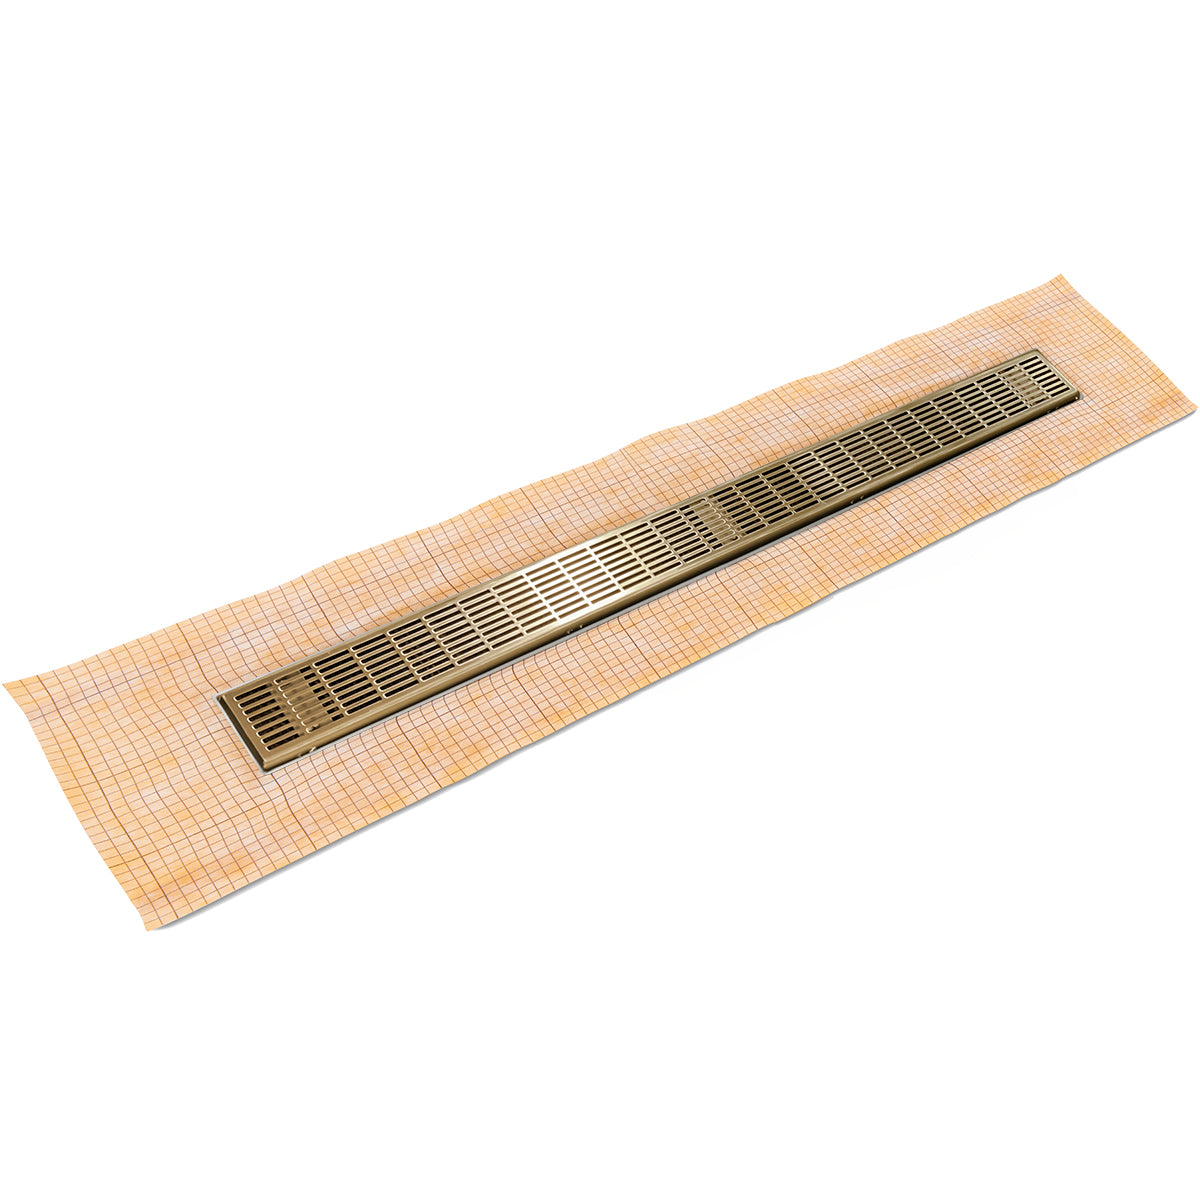 Infinity Drain 24" FCS Series Schluter-Kerdi - Fixed Flange Linear Drain Kit with 2 1/2" Perforated Slotted Grate